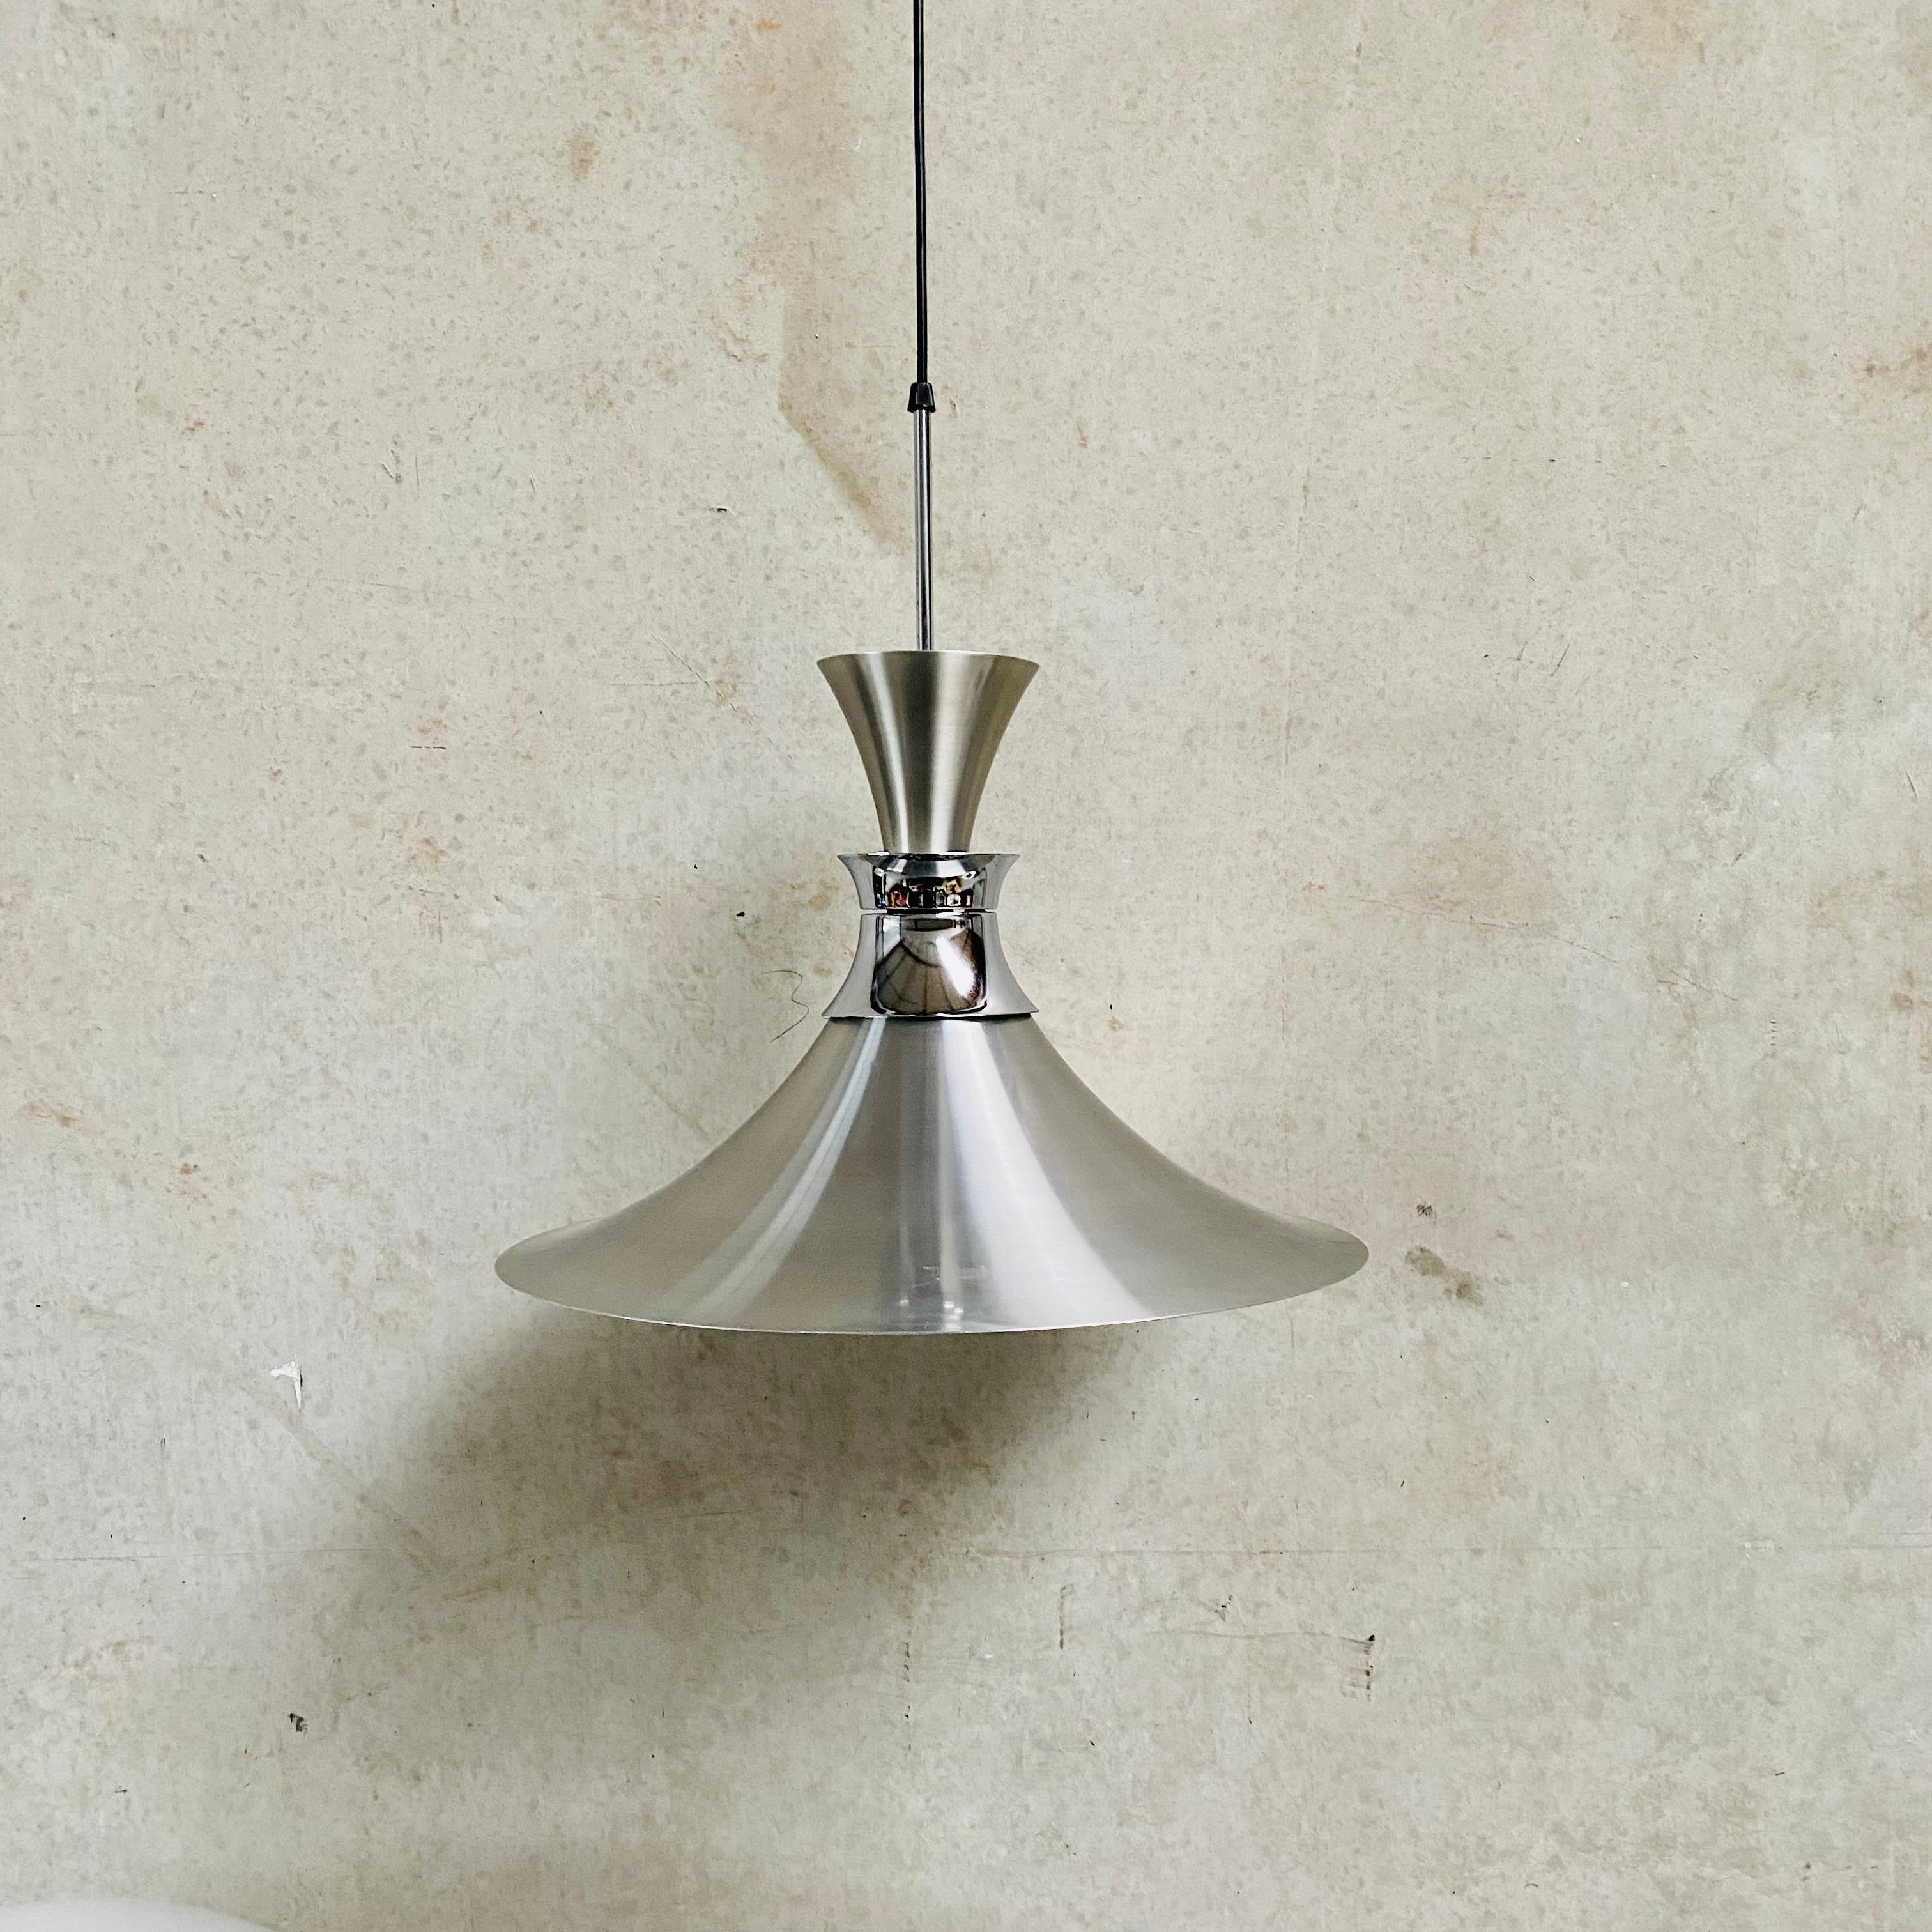 Late 20th Century Midcentury Aluminium Pendant by Bent Nordsted for Lyskaer Denmark, 1970 For Sale